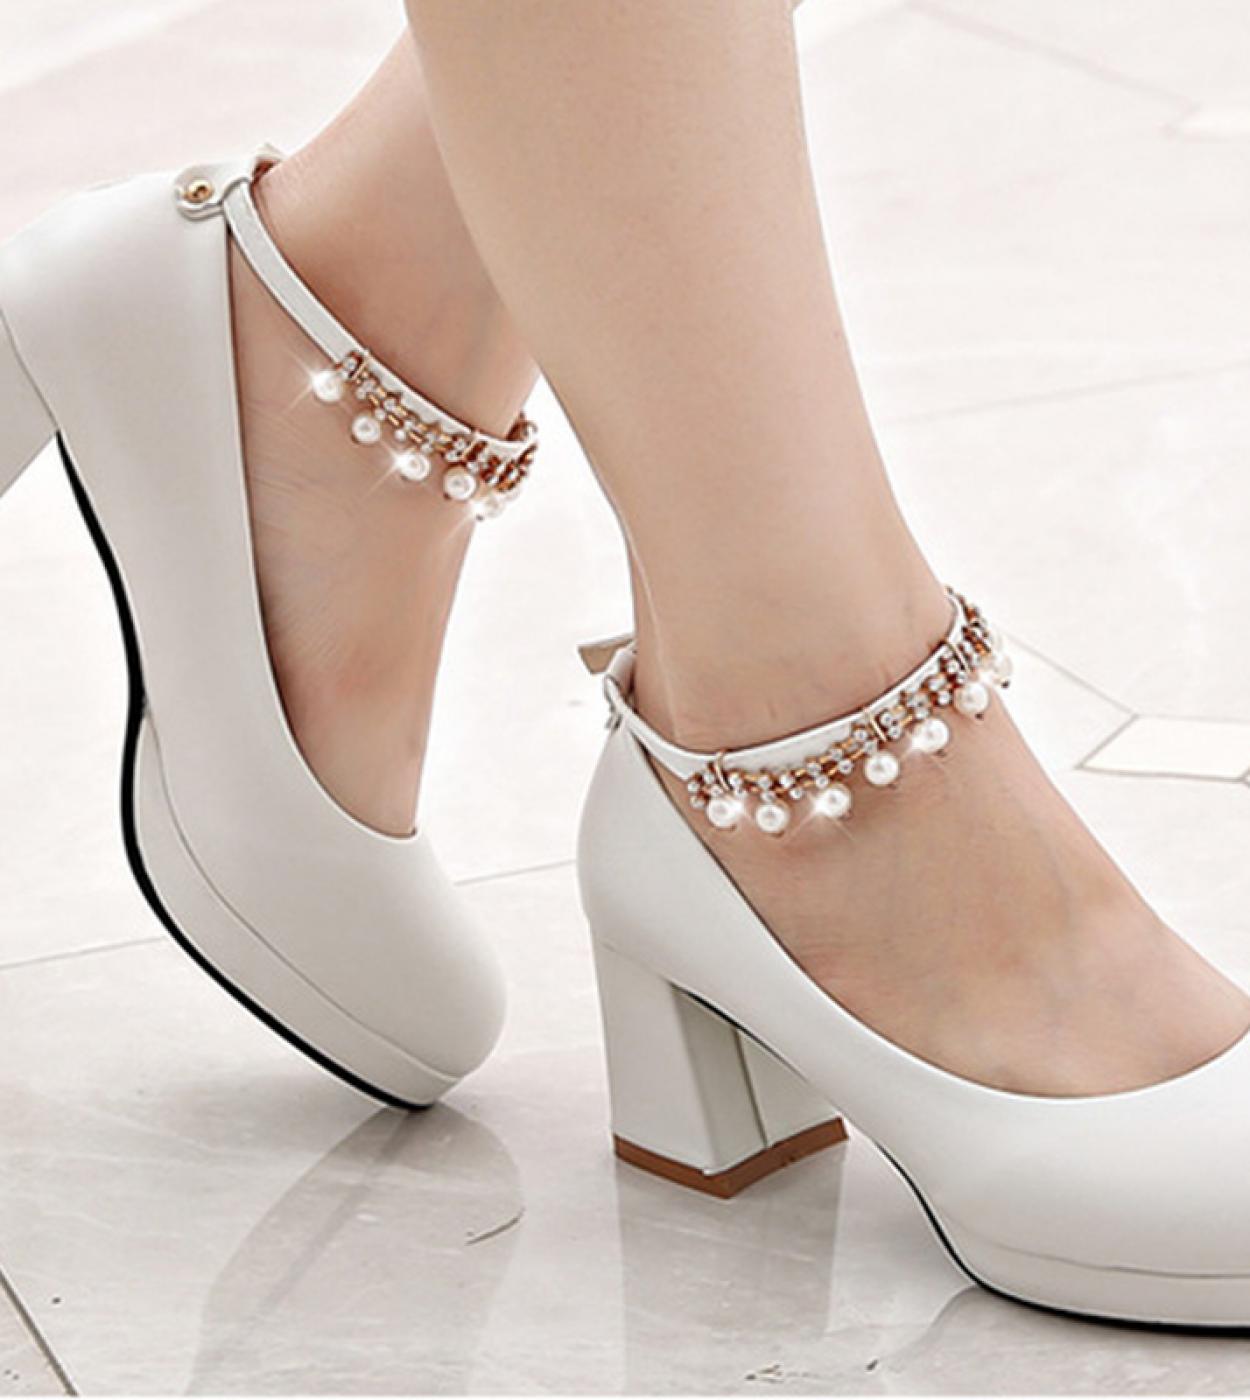 White Women Wedding Shoes Crystal Preal Ankle Strap Bridal Shoes Woman Dress Shoes Seay Pumps Sweet Party Shoes